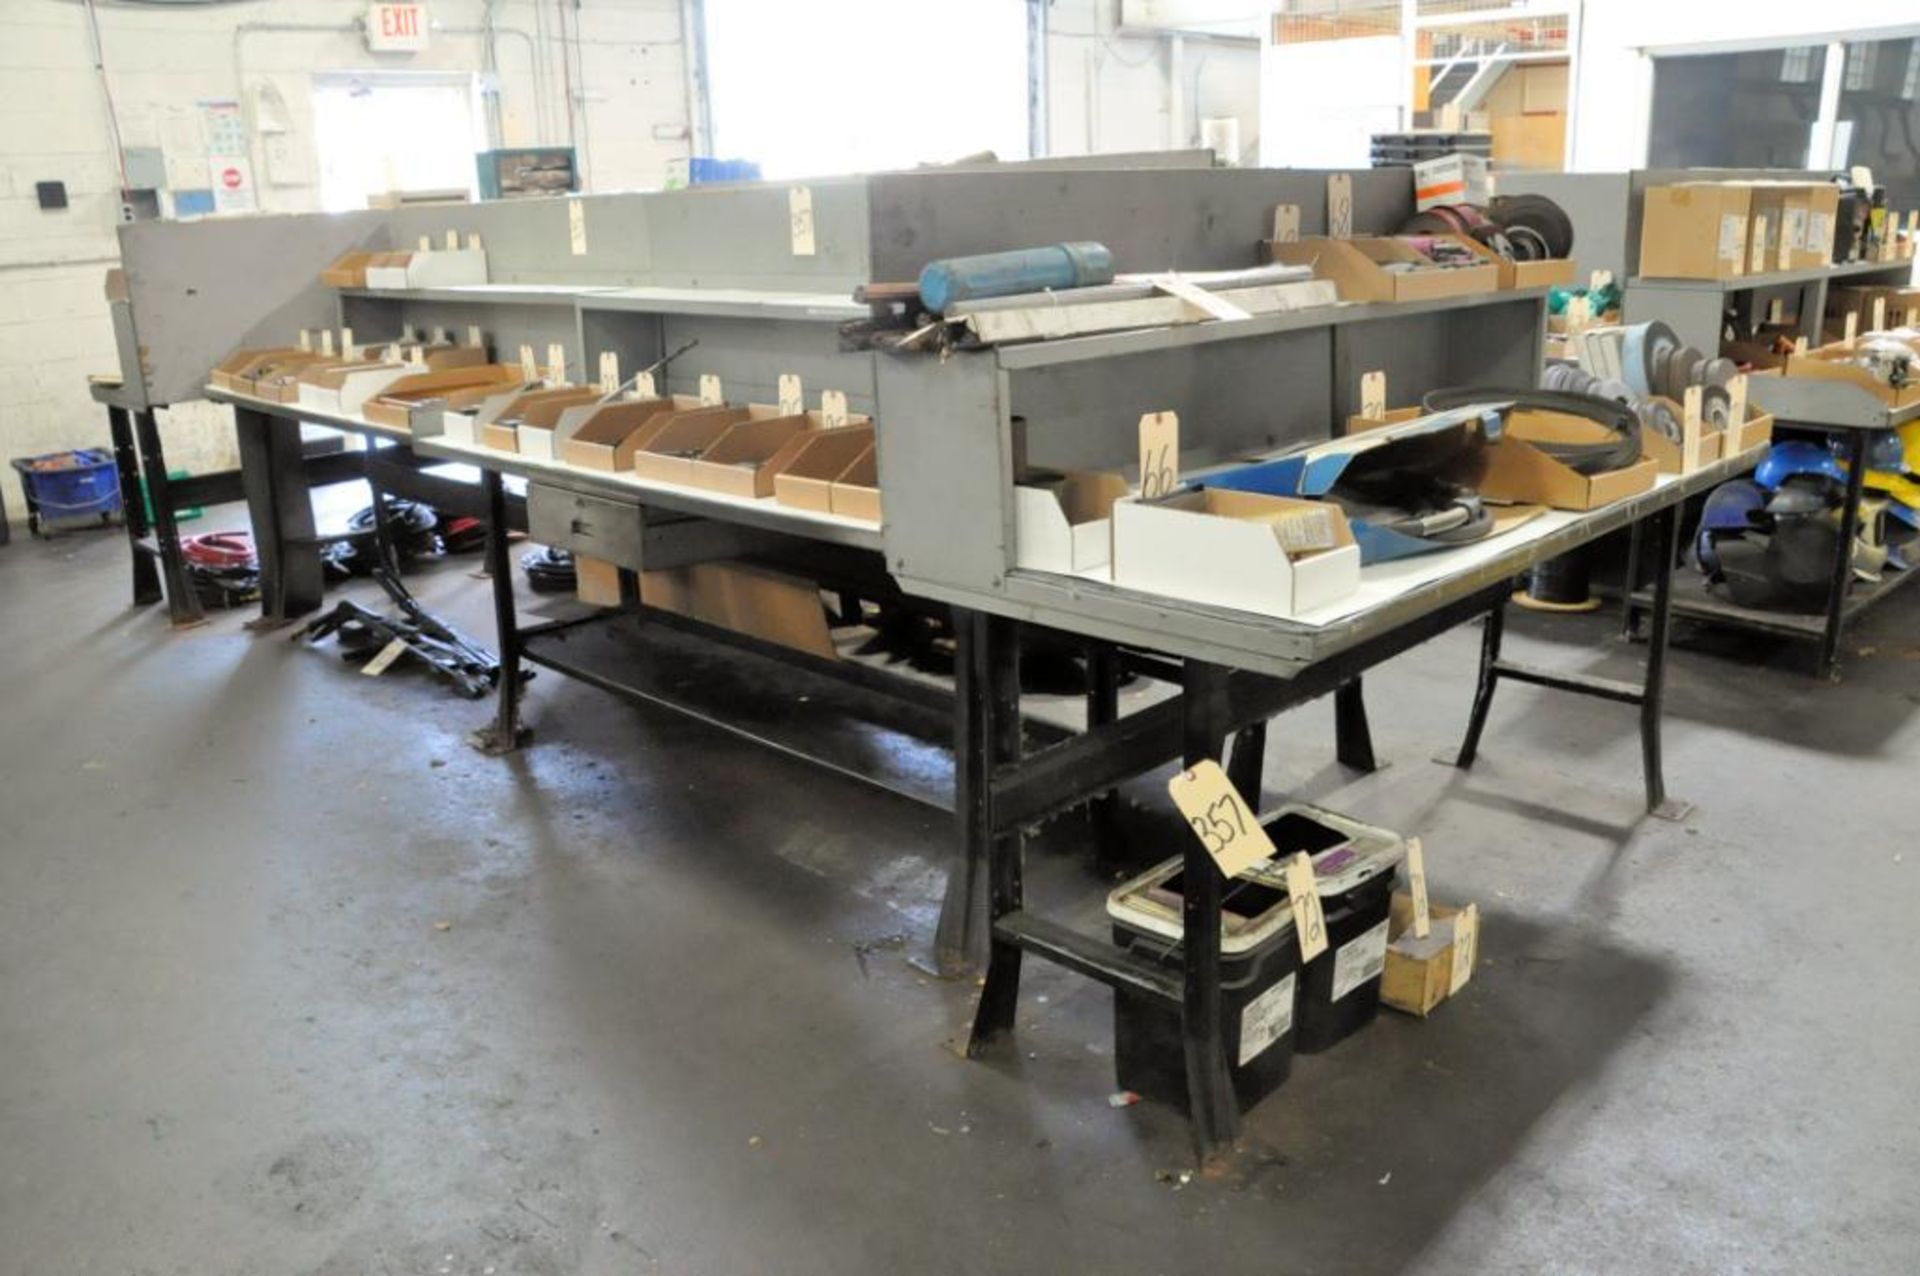 Lot-(6) Standard Work Benches, (Contents Not Included), (Not to Be Removed Until Empty)